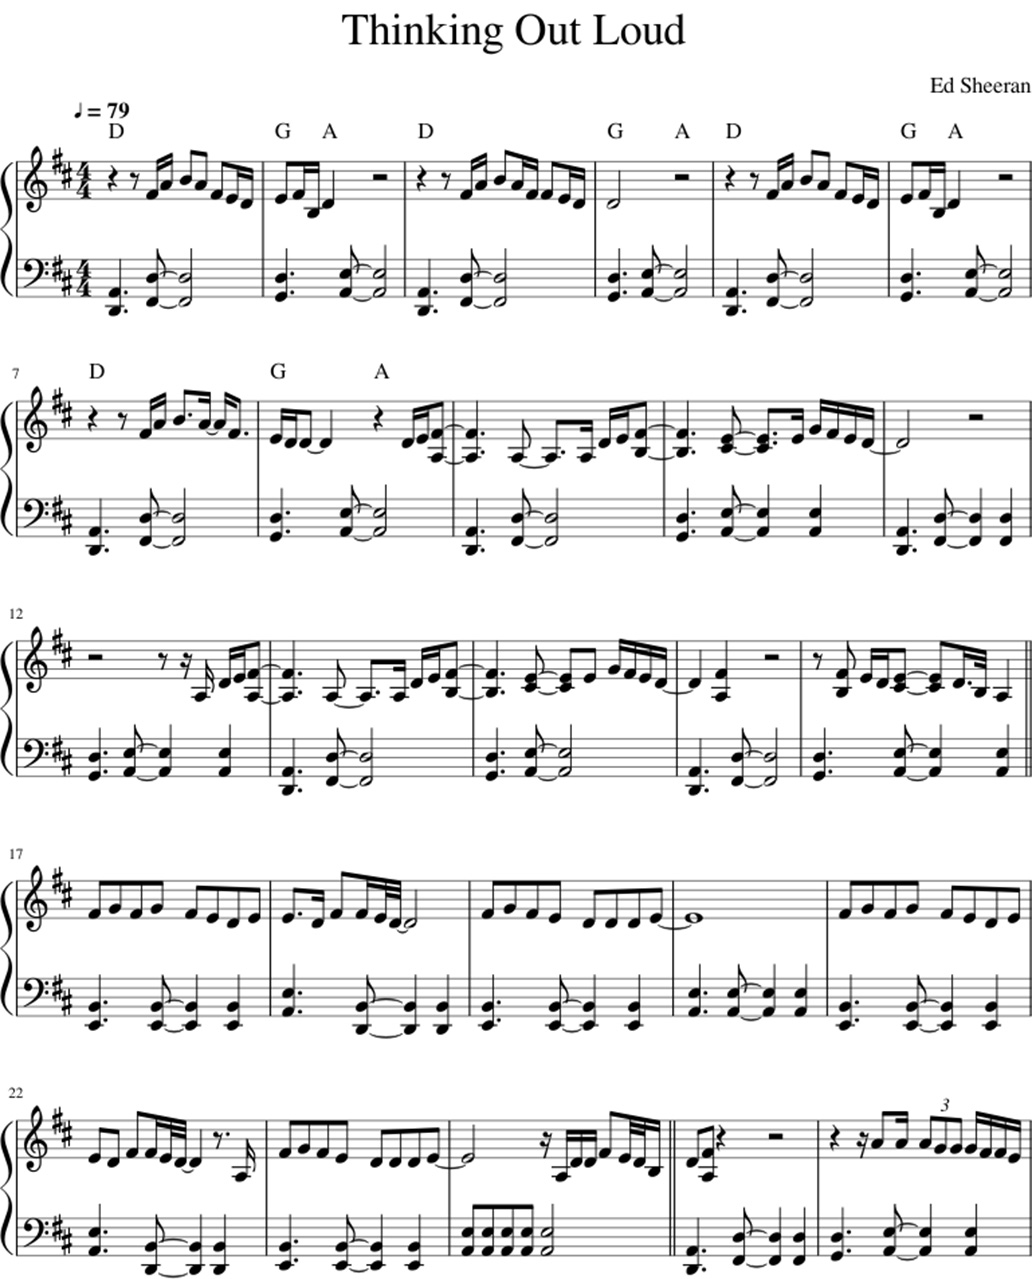 Thinking out loud sheet music notes 1